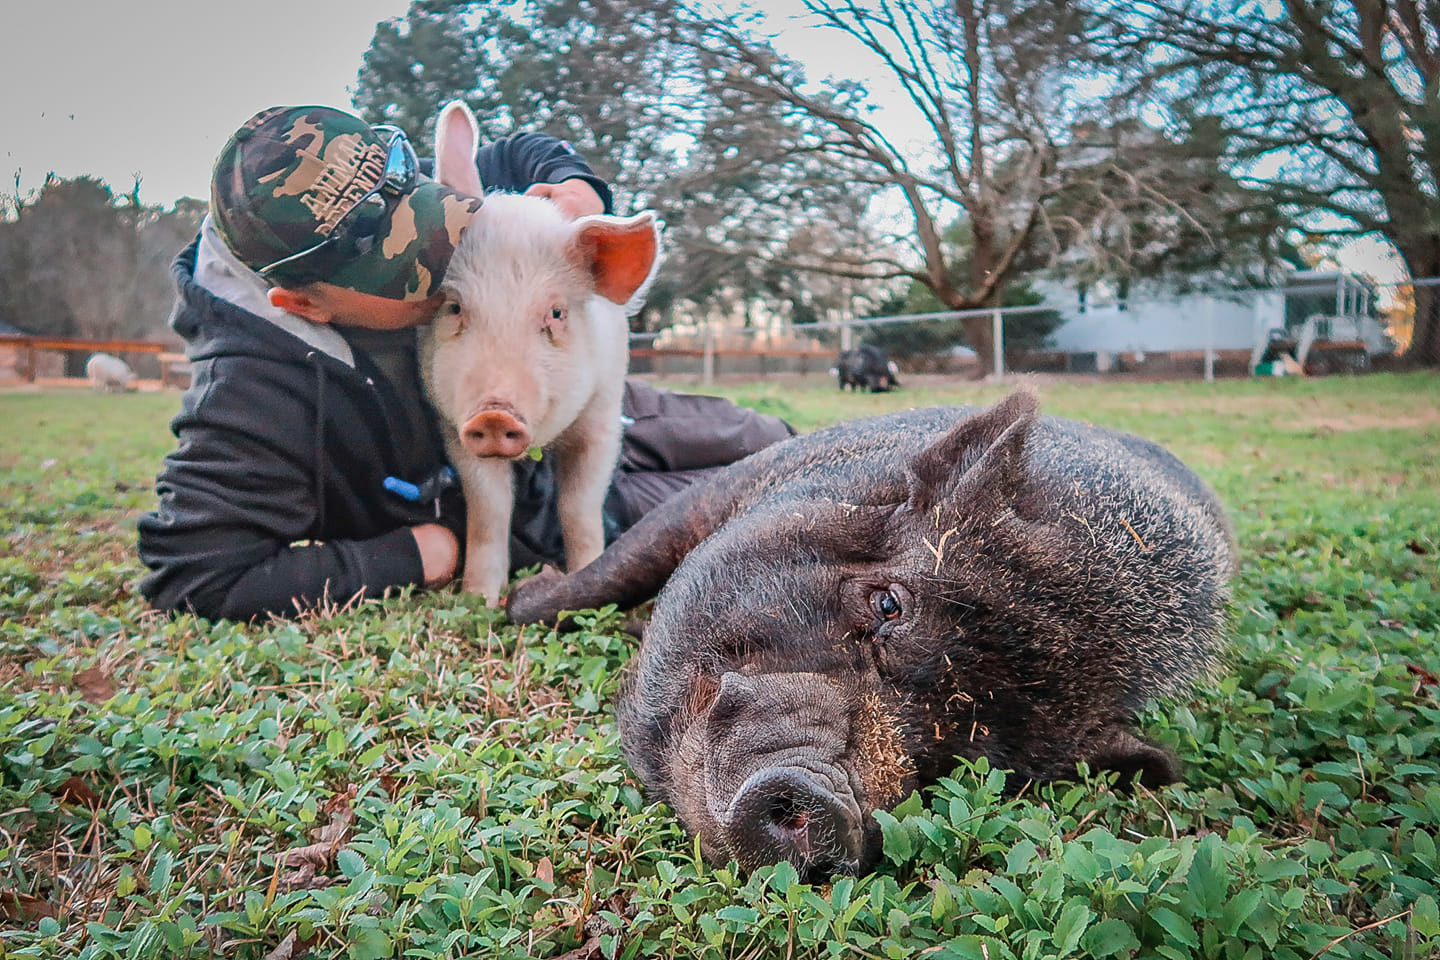 Rescued pigs living in peace at the animal sanctuary.